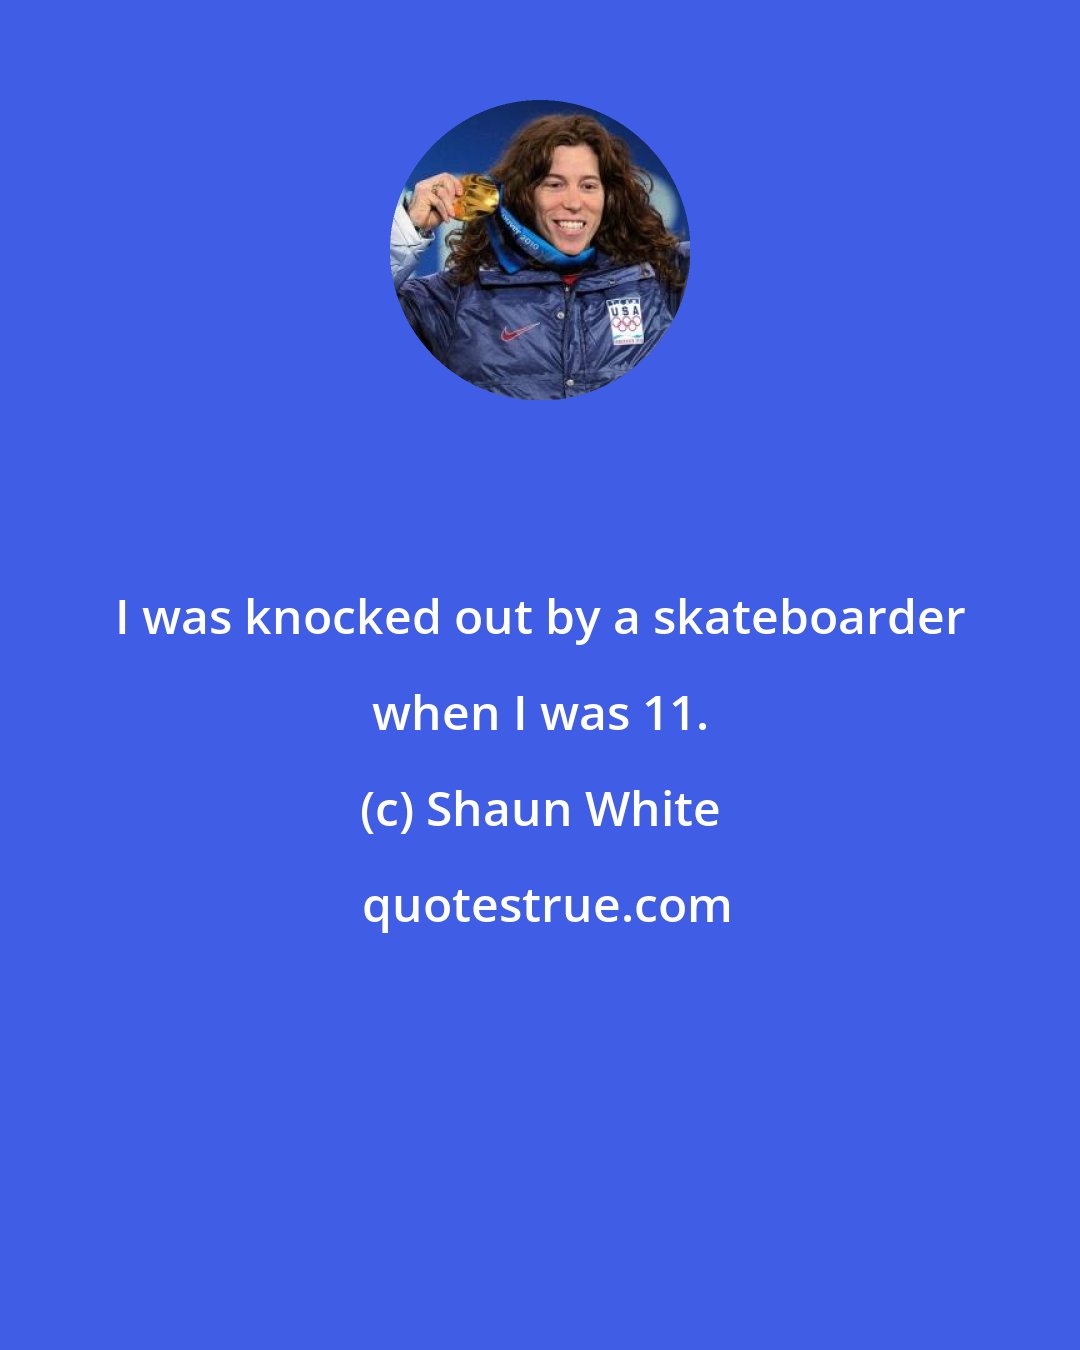 Shaun White: I was knocked out by a skateboarder when I was 11.